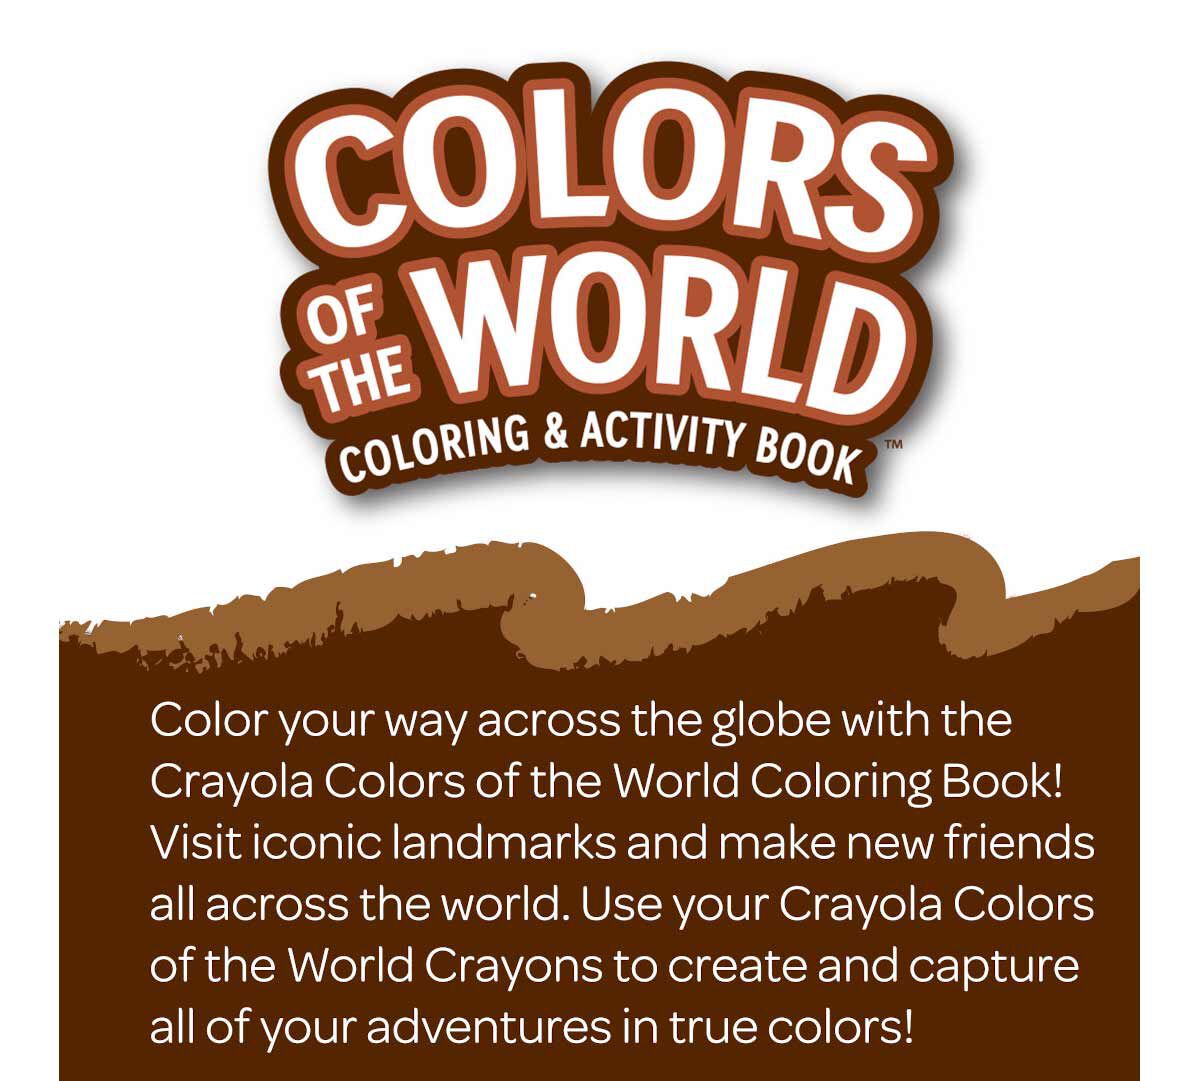 25-0717 48 Coloring Pages and Educational Activities Crayola Colours of the World Album Activity & Coloring 